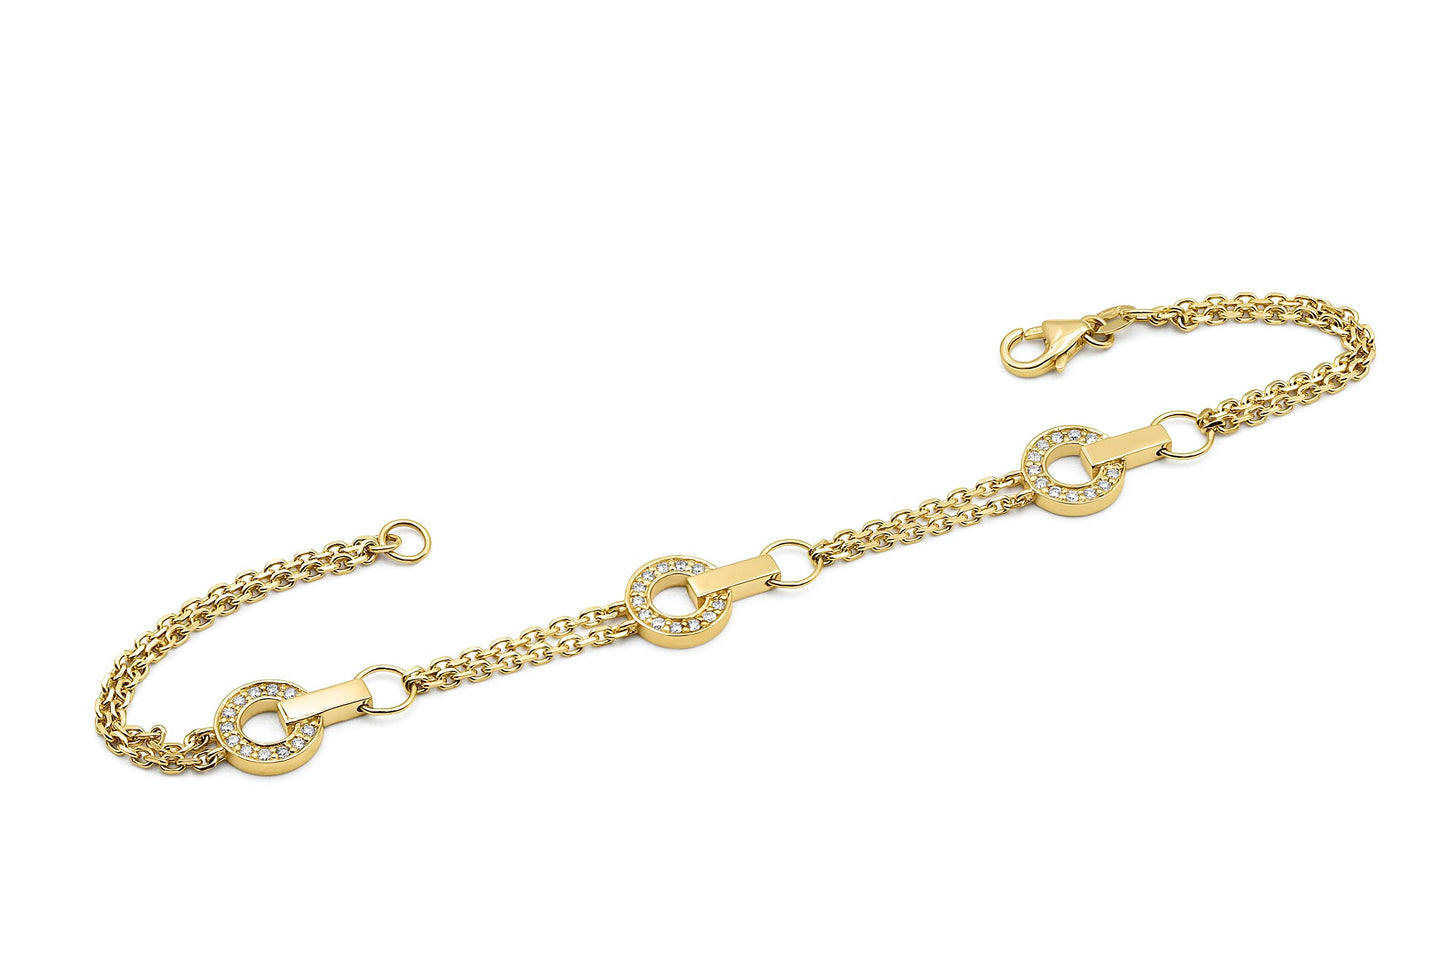 Bracelet with diamonds and yellow gold chain